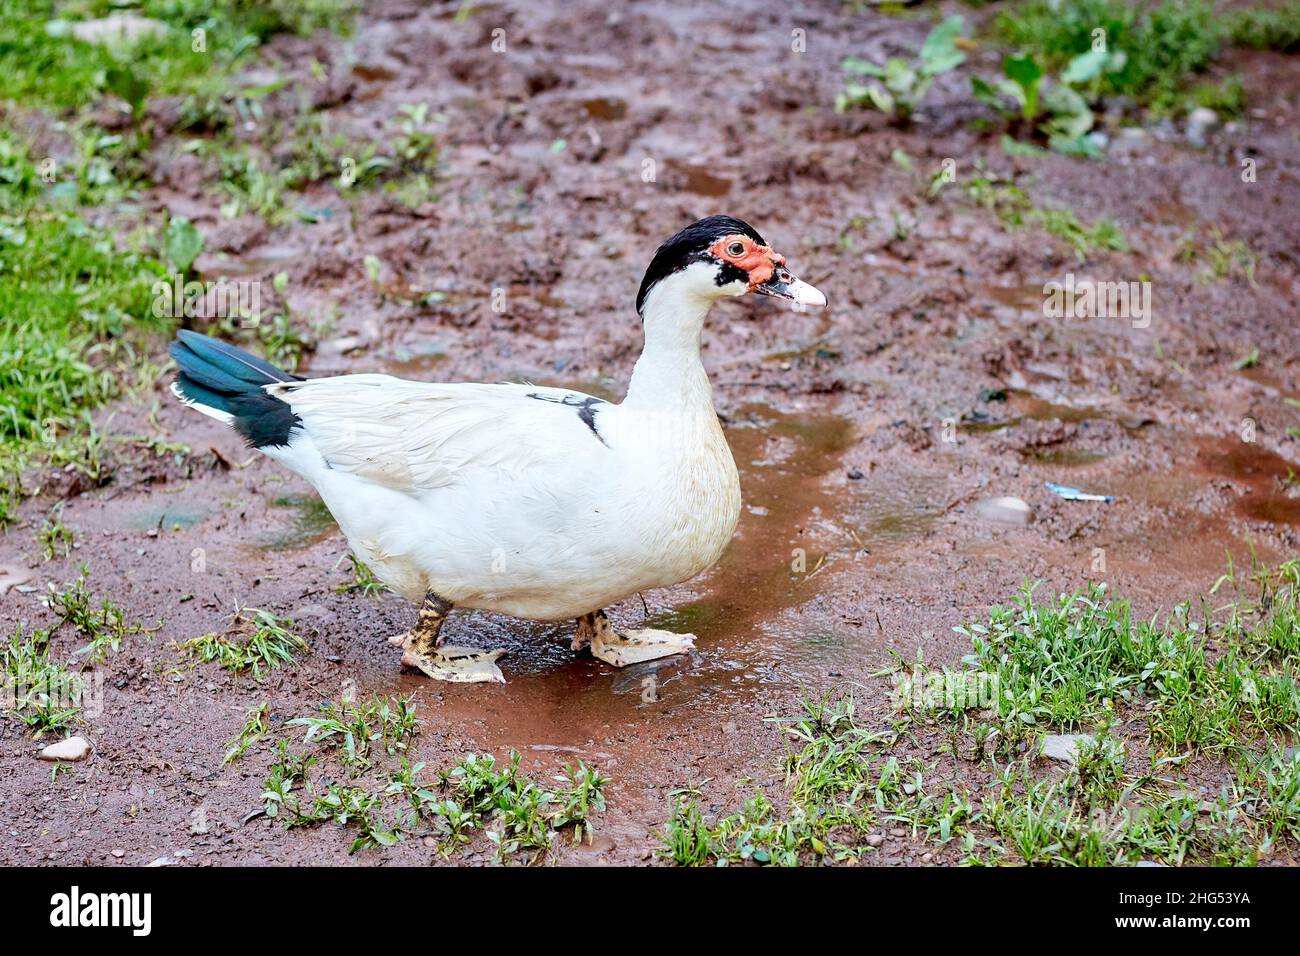 Black Headed Muscovy Duck with Blue Tail Feathers Walking in Mud Puddle Stock Photo